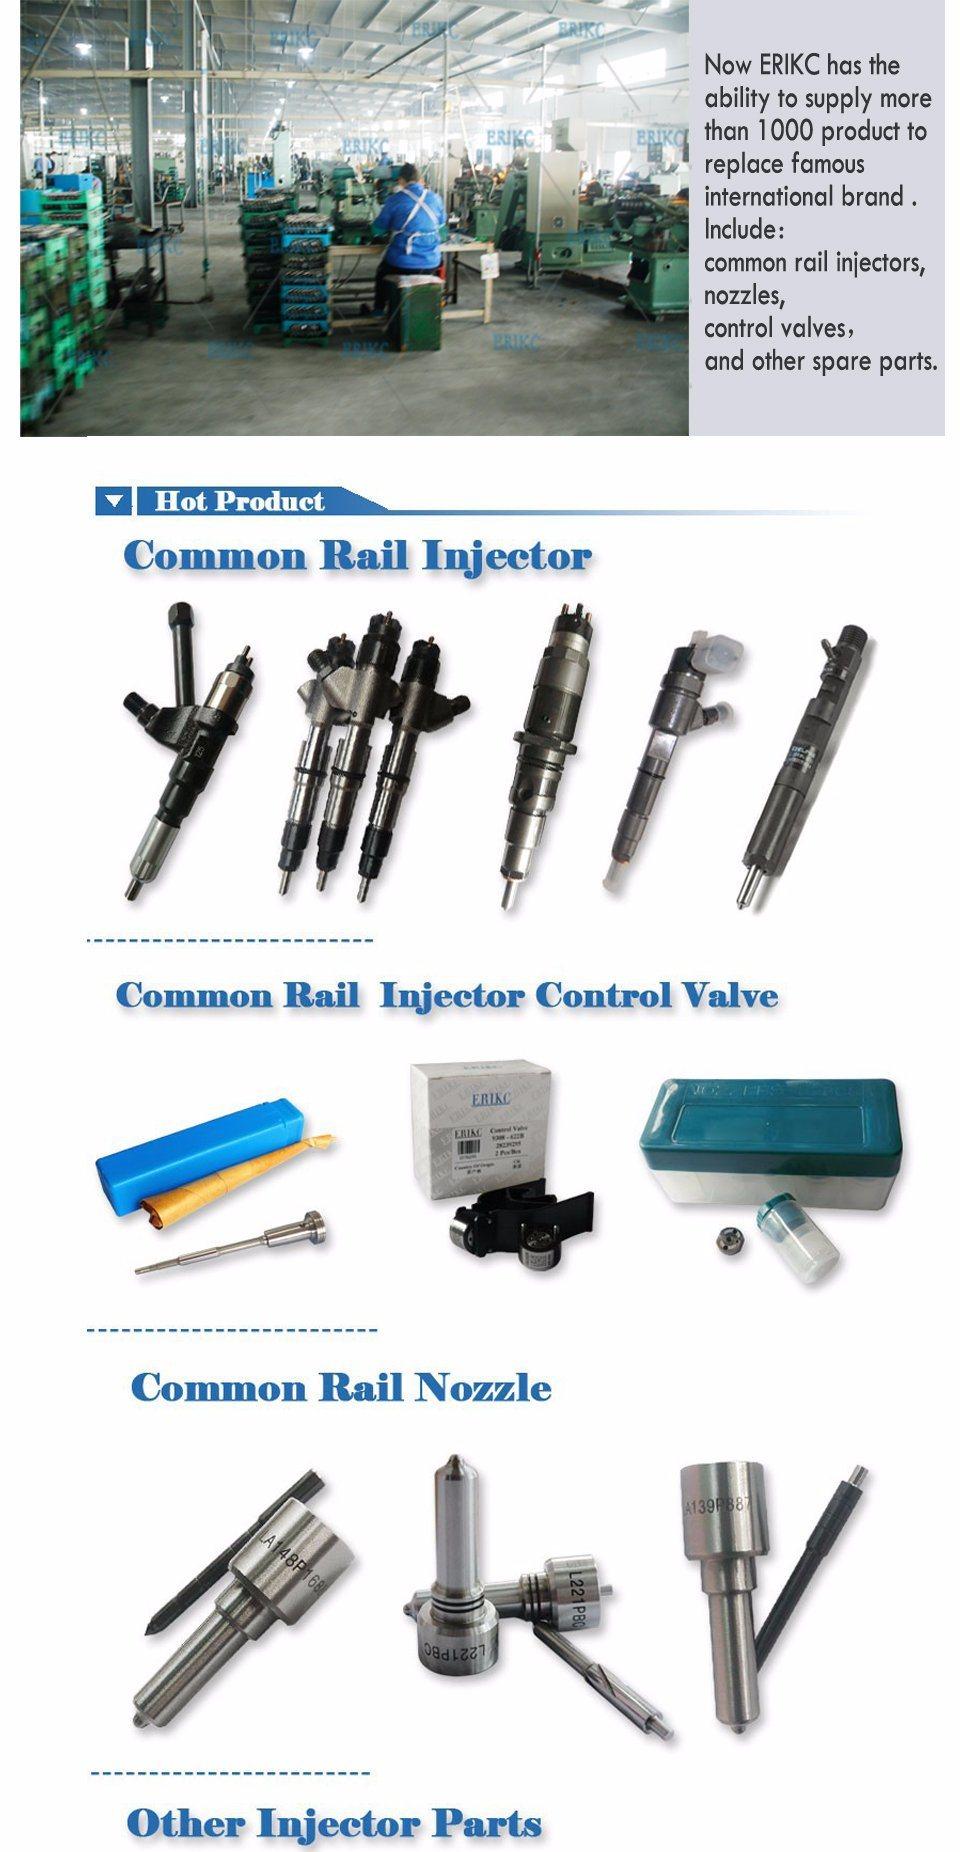 Diesel Inyector Overhaul Repair Kit 7135-647 Including Nozzle L120prd and Valve 9308-621c for Injector Ejbr04001d and Ejbr01801A Ejbr01801z